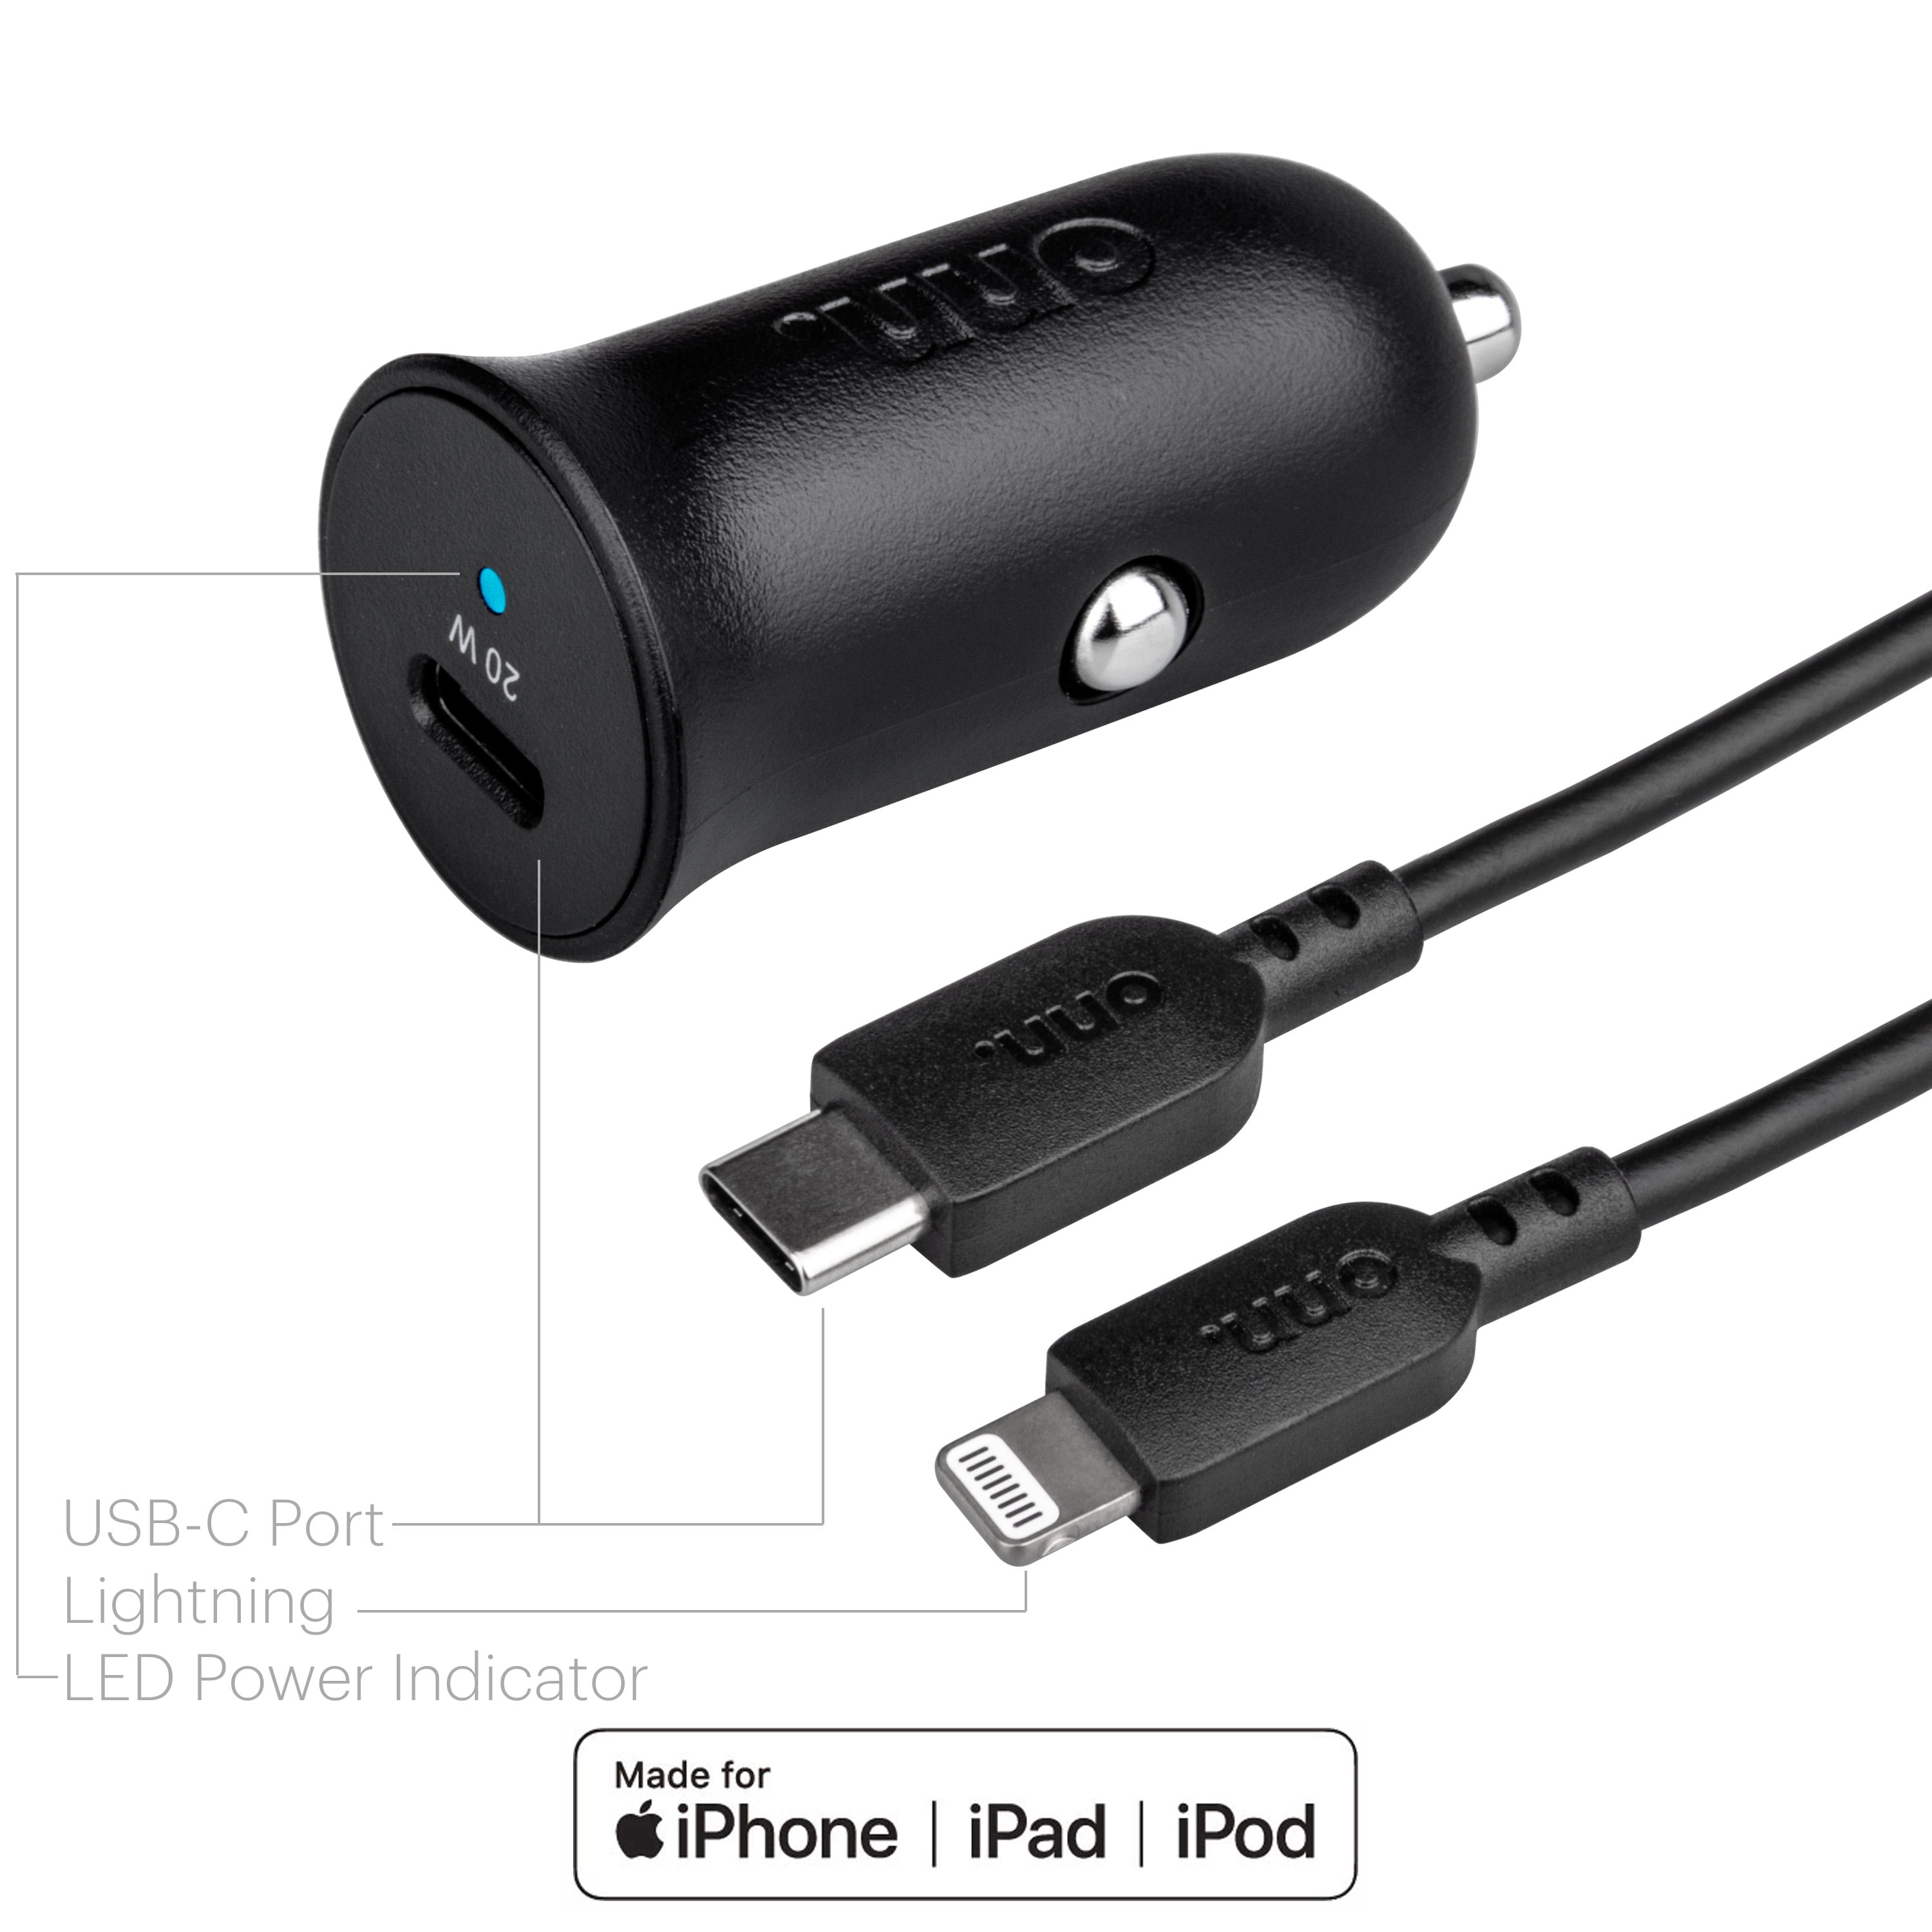 USB-C Car Charger Kit 20W - USB-C to Lightning - iPhone 8 or later